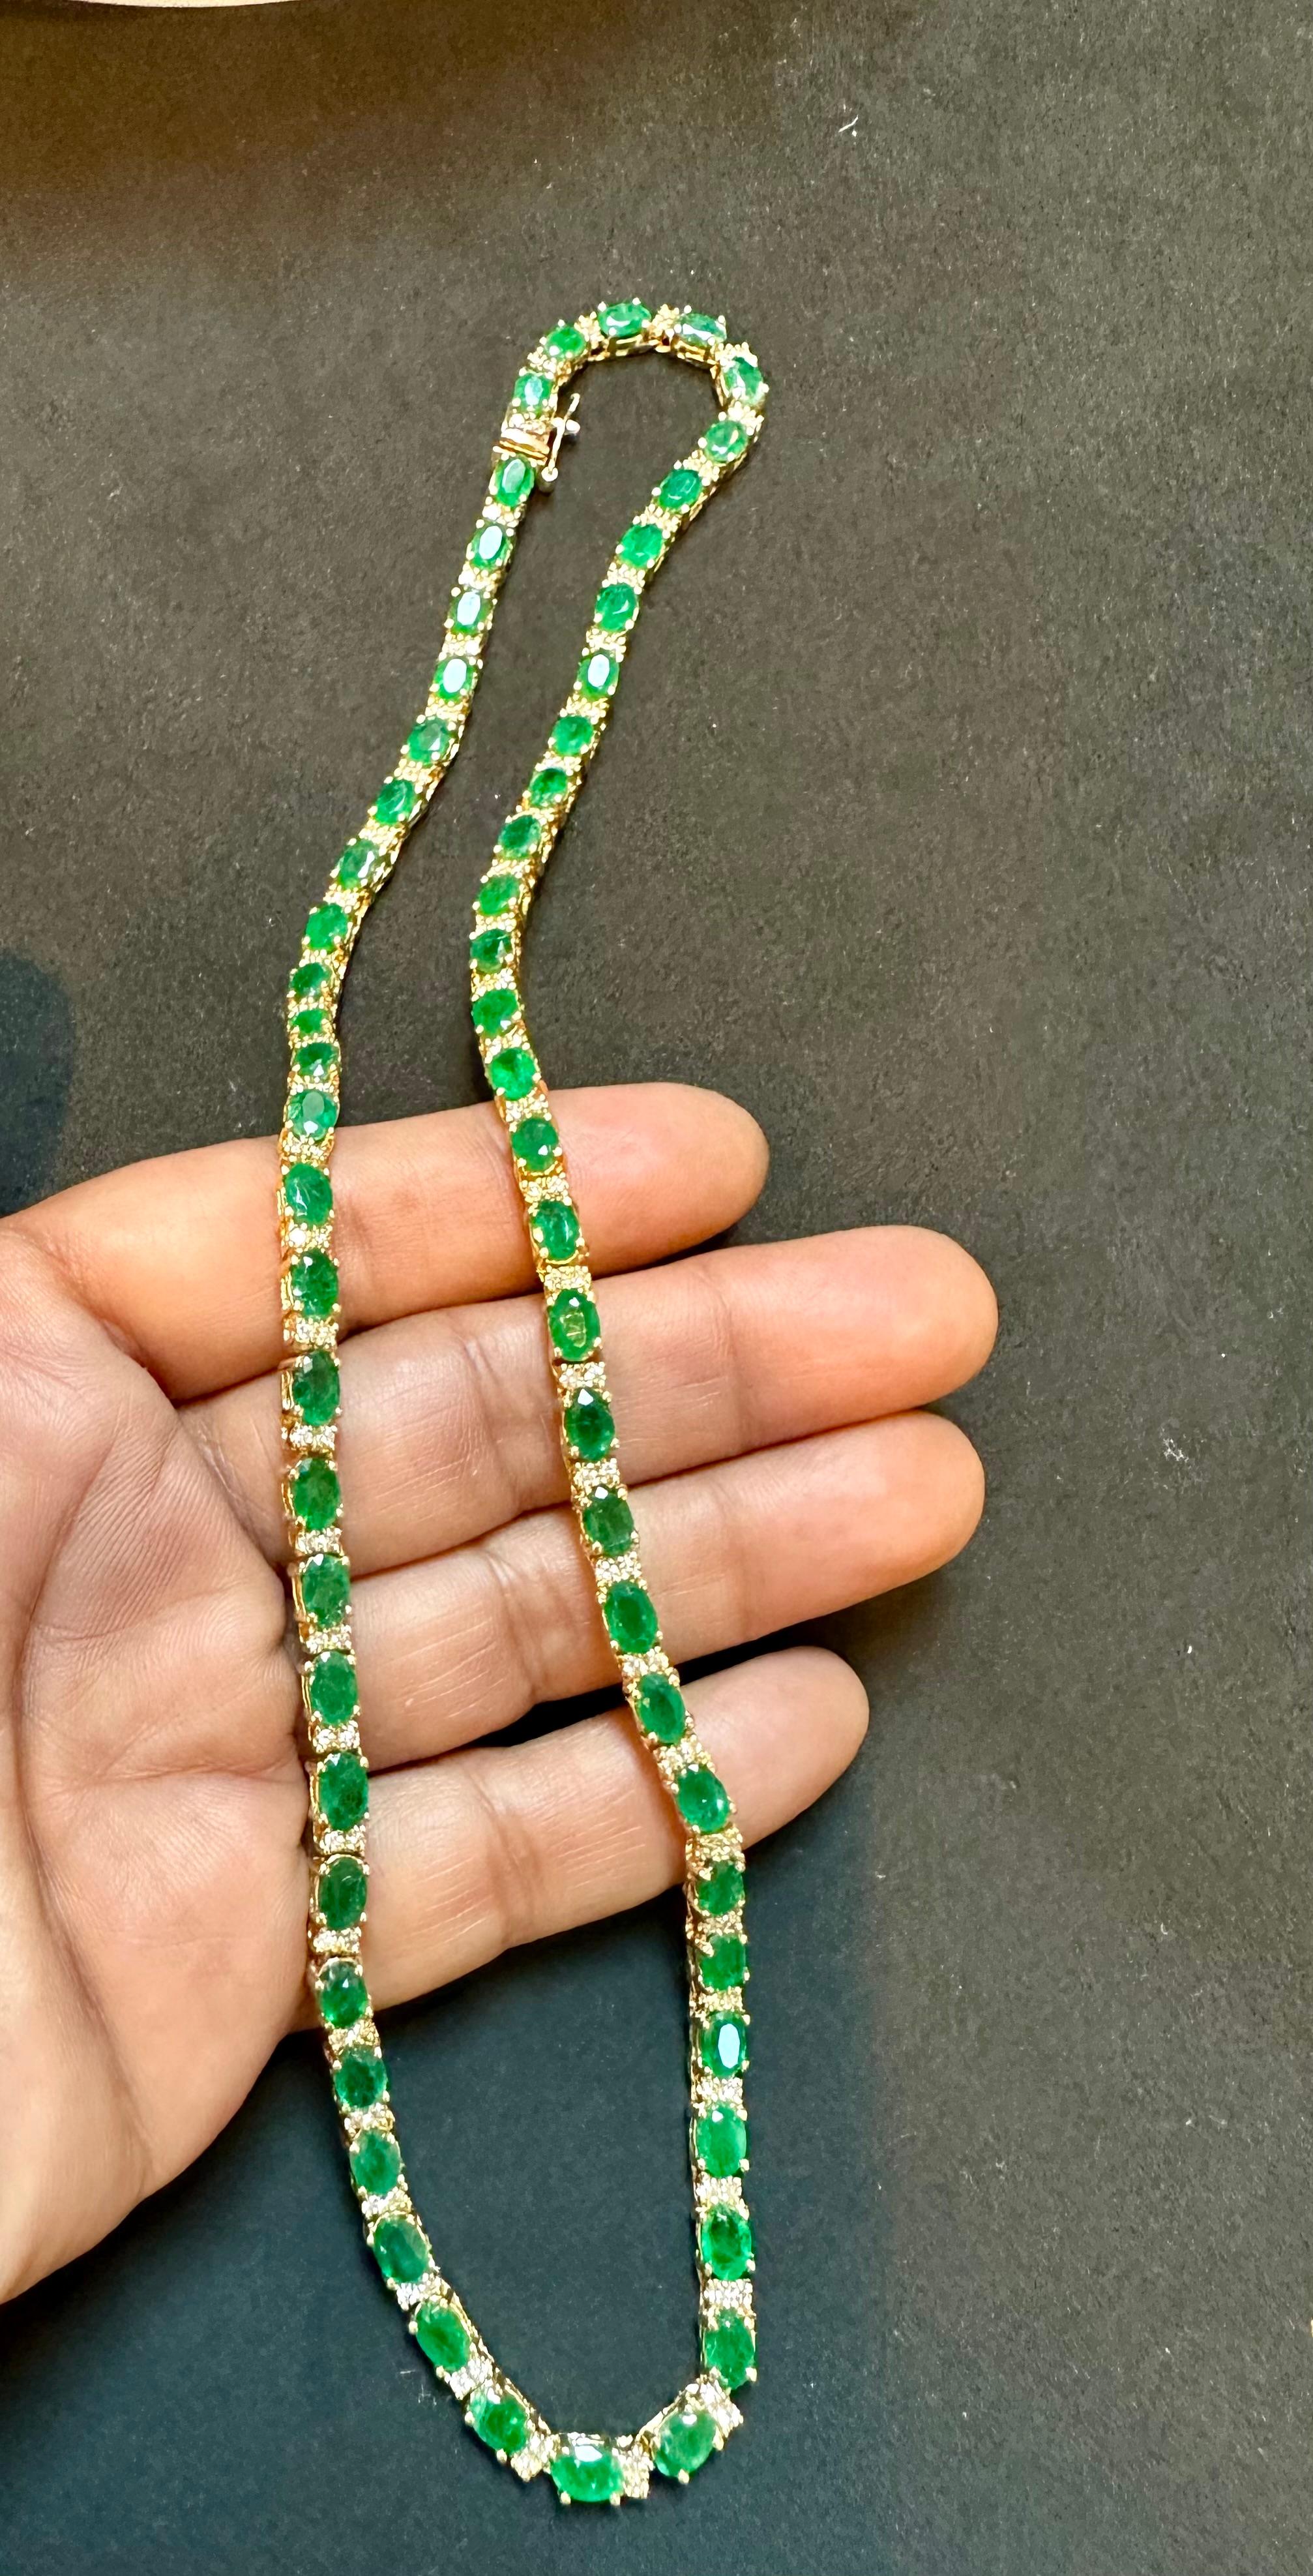 30 Carat Oval Brazilian Emerald & 3 Carat Diamond Tennis Necklace 14 Karat Gold In Excellent Condition For Sale In New York, NY